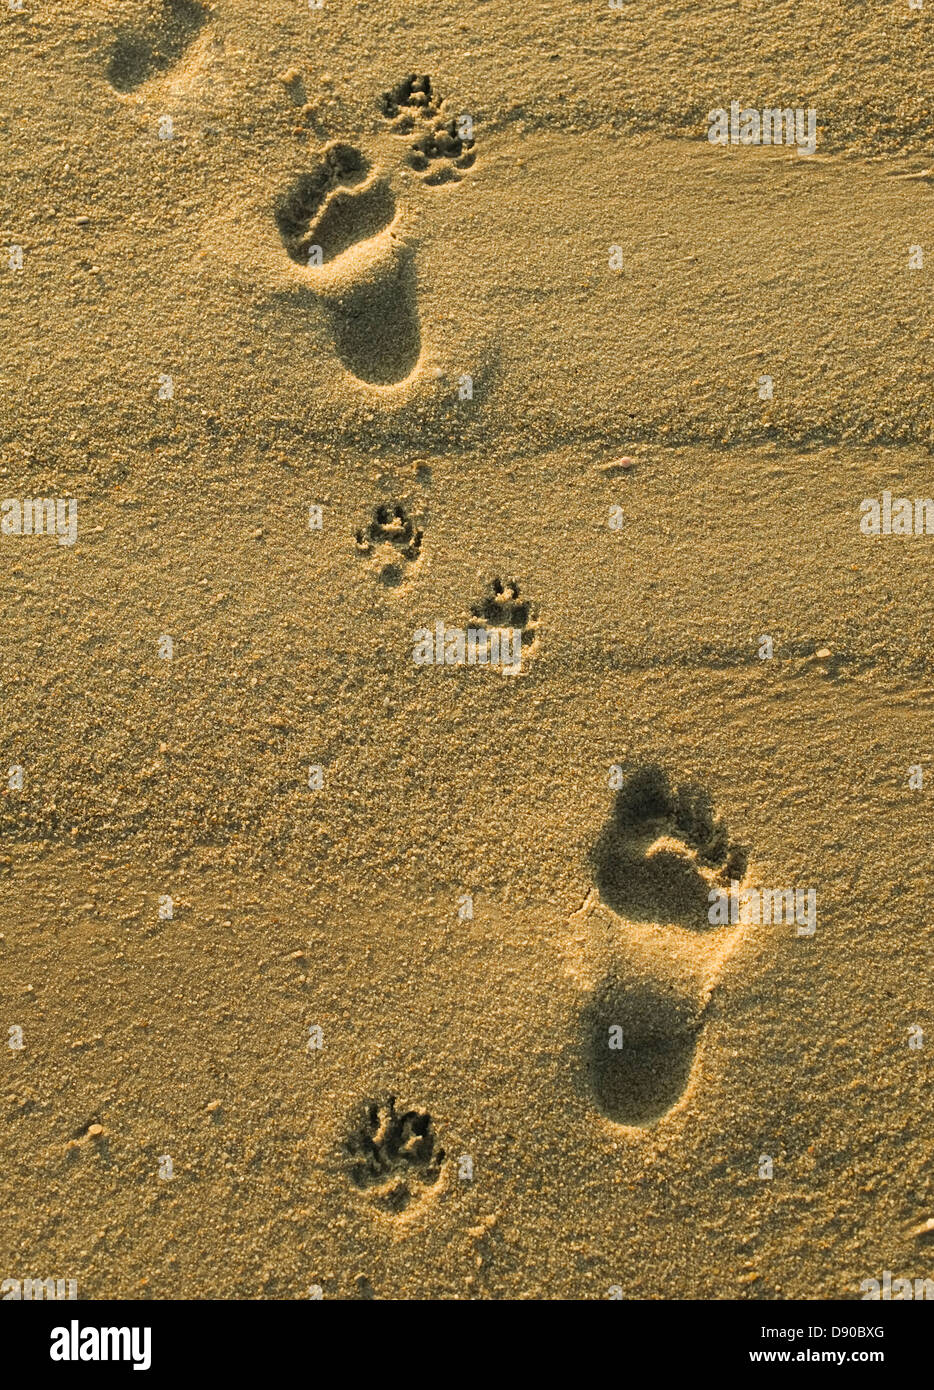 Footprints in the sand, a human being and a dog. Stock Photo